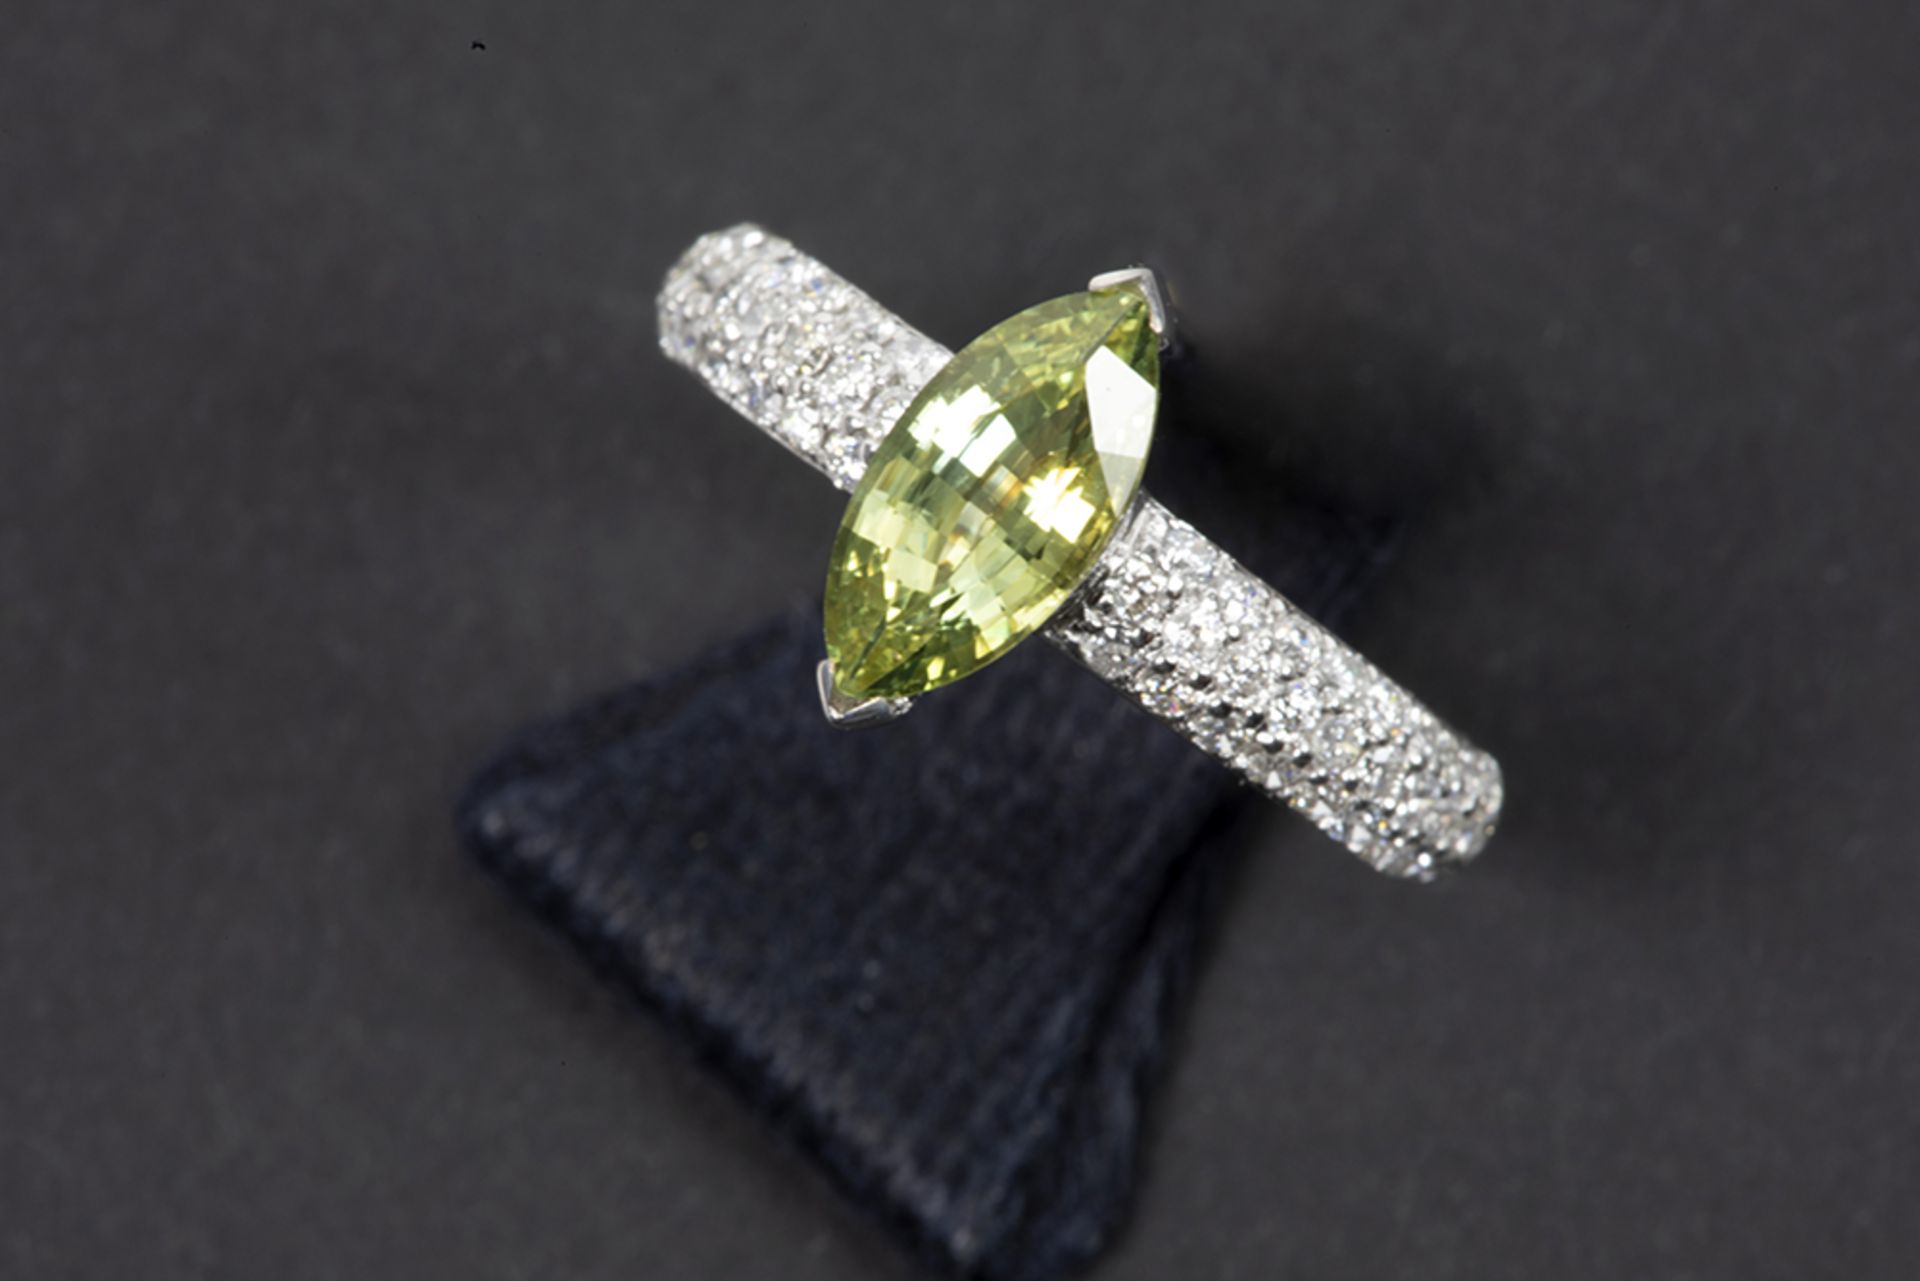 ring in white gold (18 carat) with a 1,35 carat sapphire with quite rare green color and ca 0,70